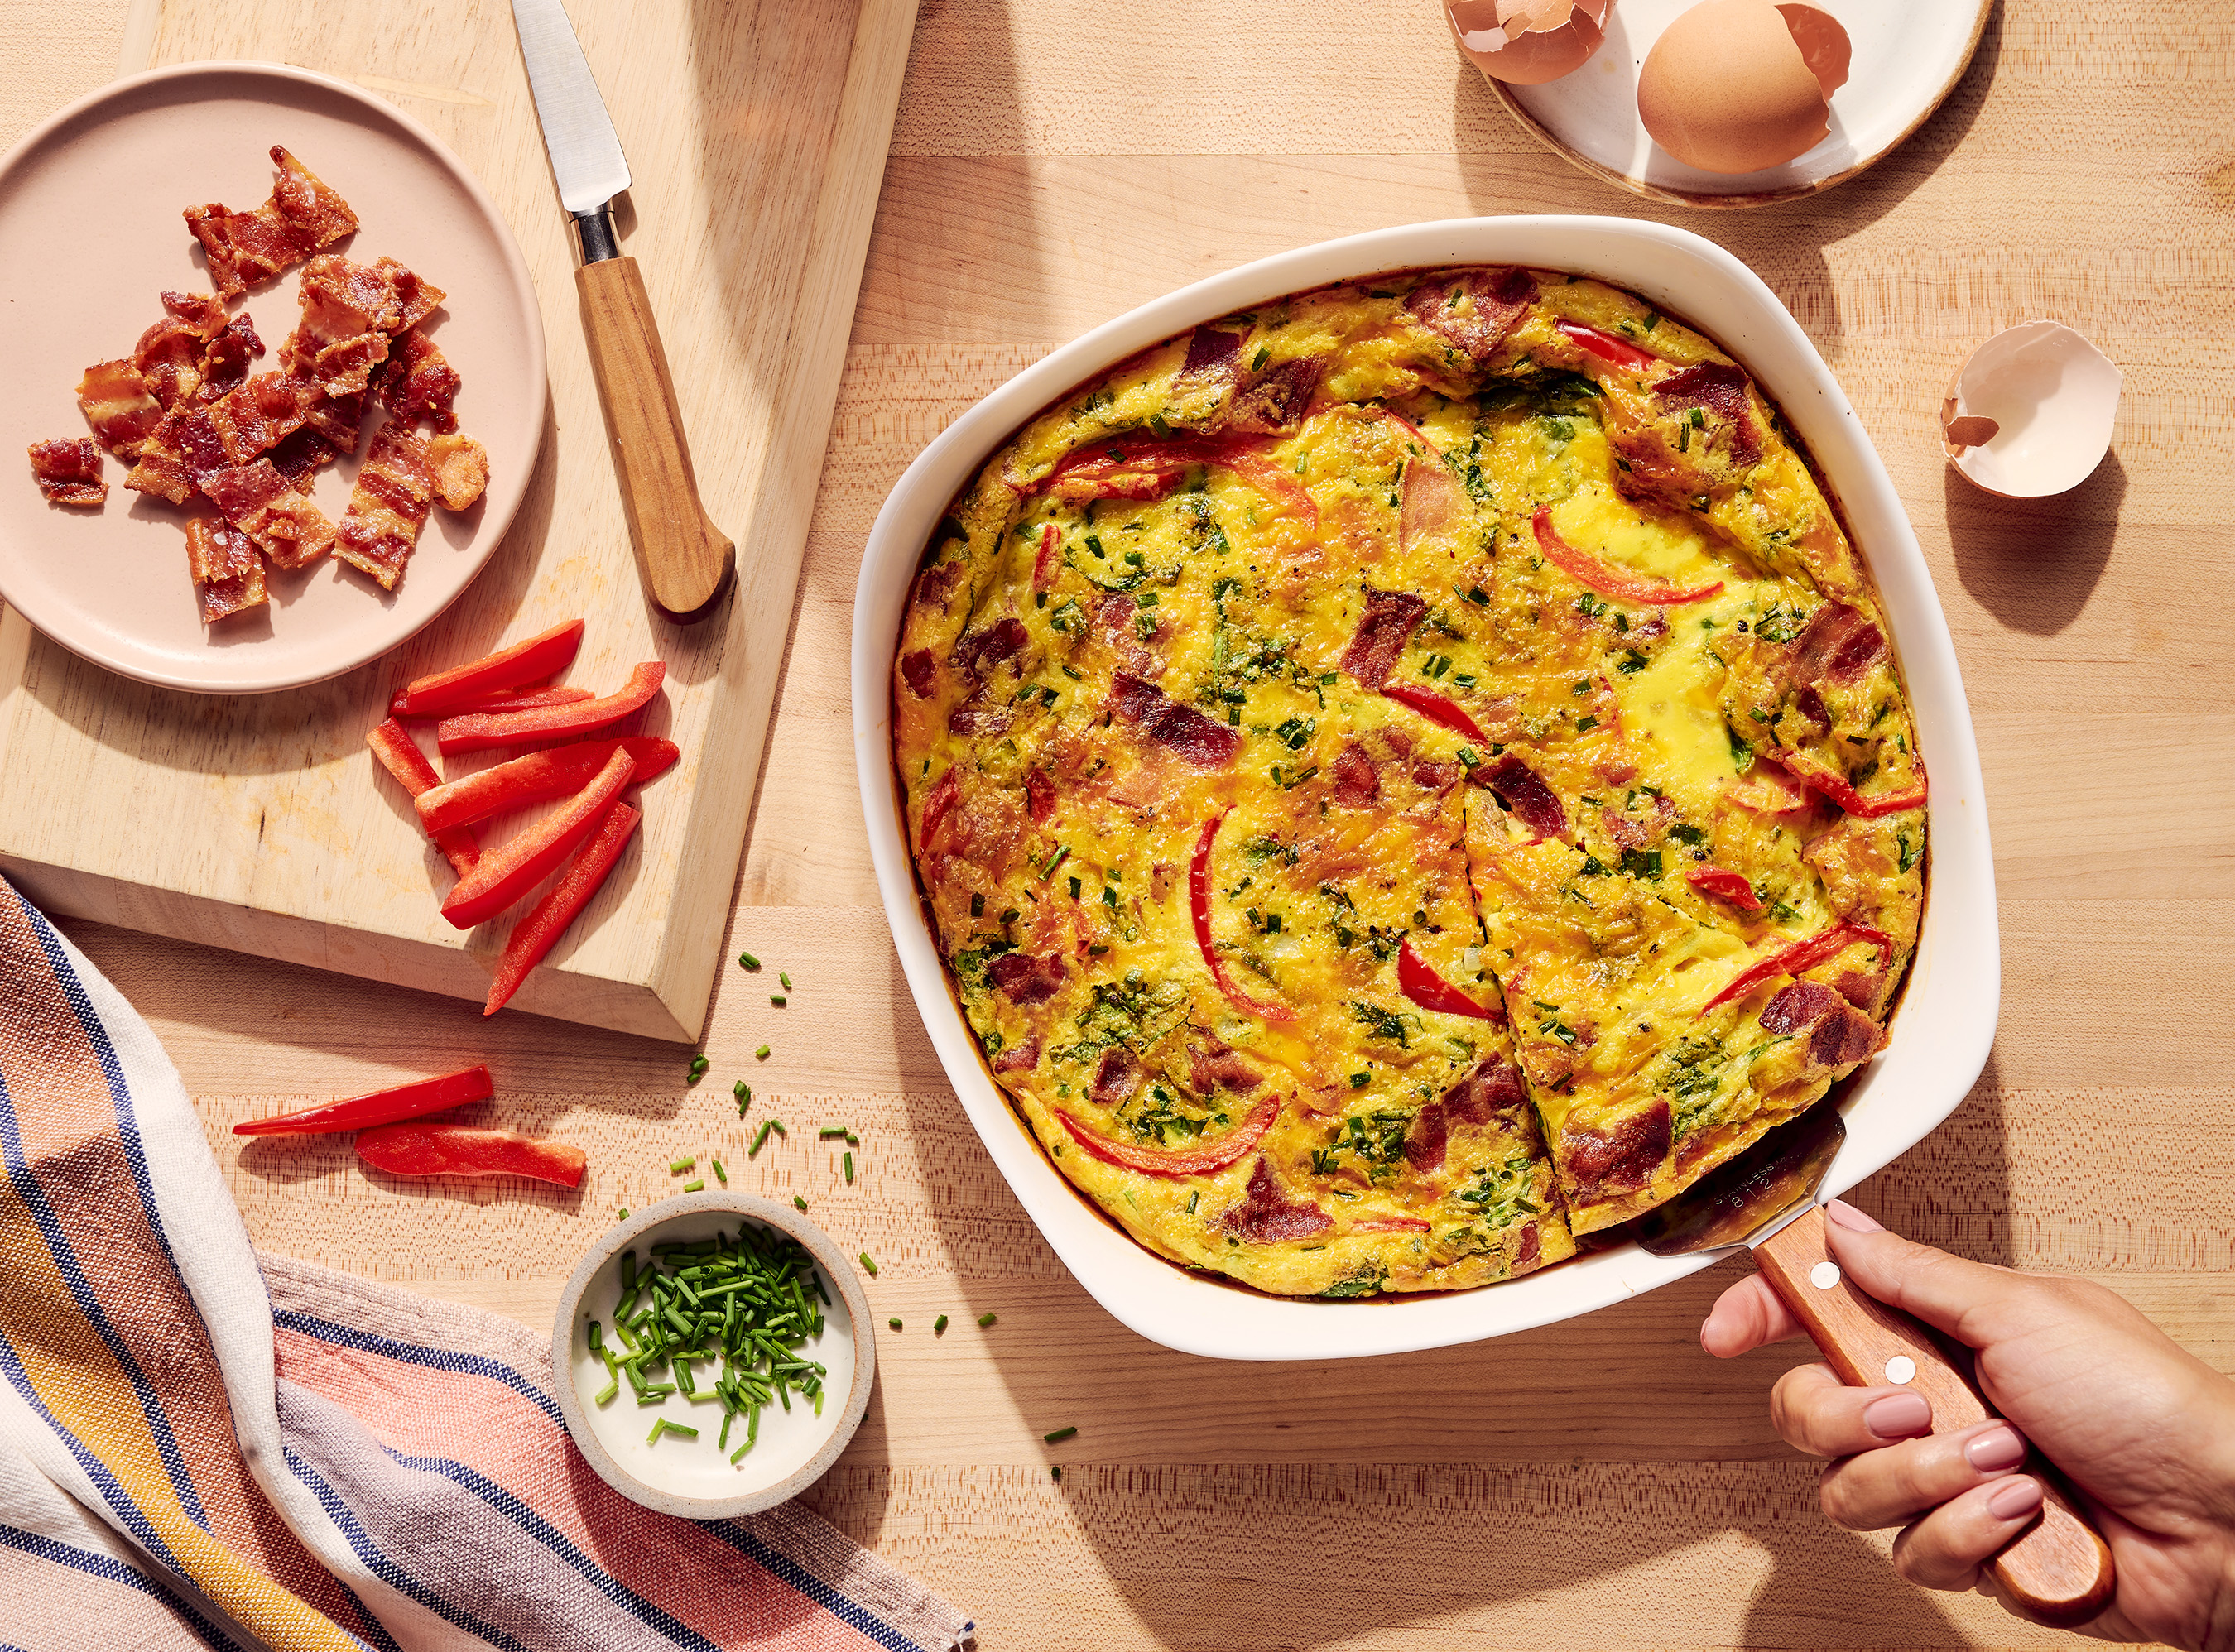 All Grown Up: This kitchen sink quiche puts a grown-up twist on childhood favorites and is elevated in flavor and health. Recipe by Katherine Schwarzenegger (@katherineschwarzenegger).